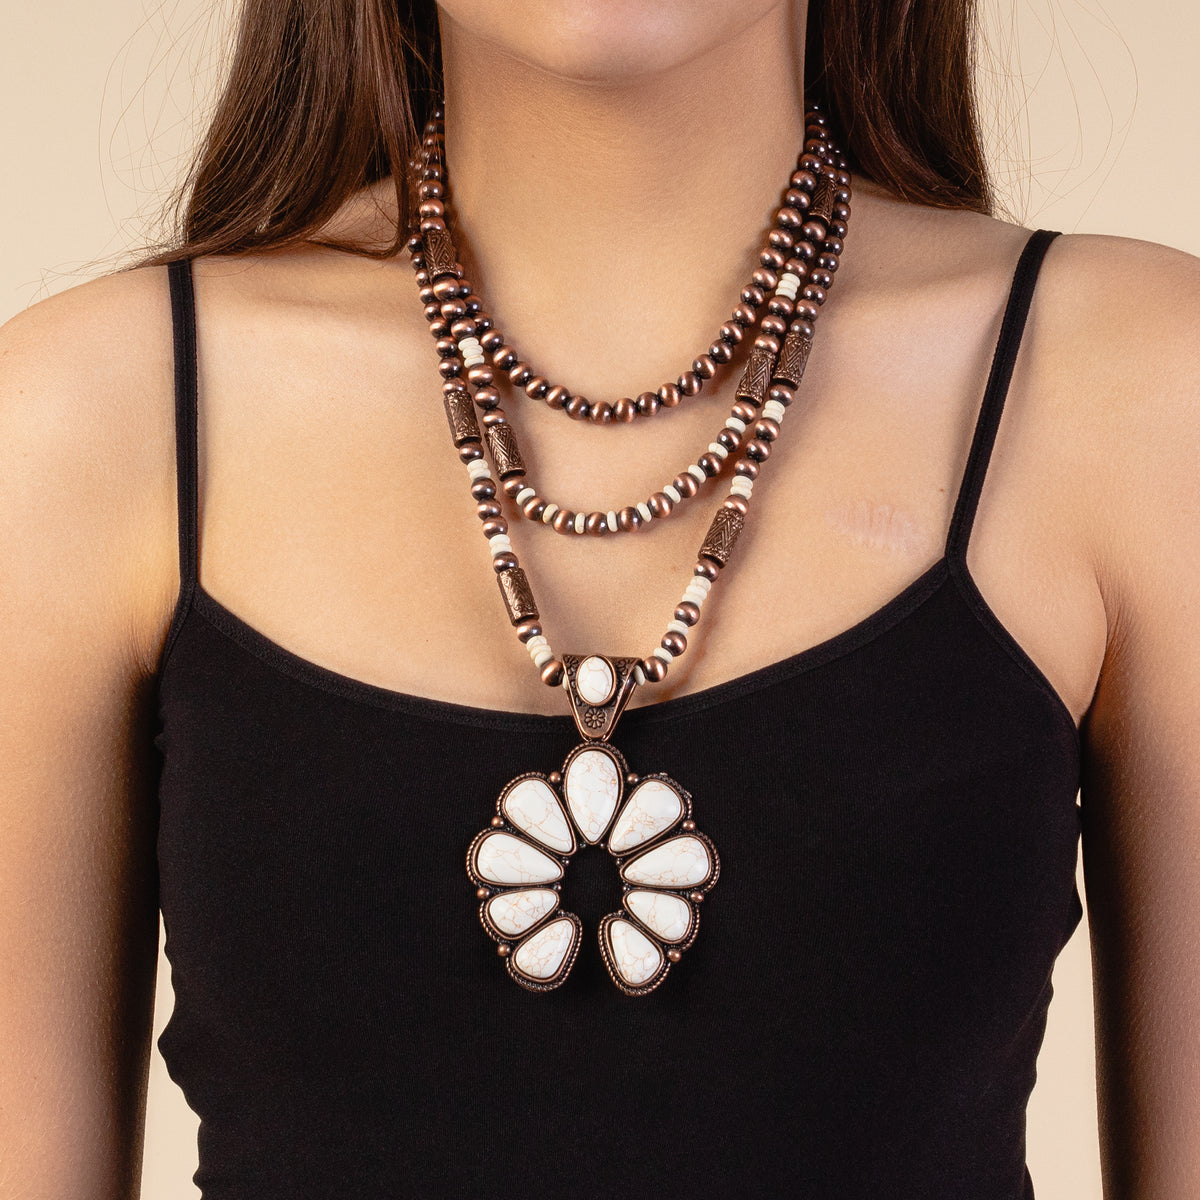 72890 - Layered Squash Blossom Necklace - Ivory & Copper